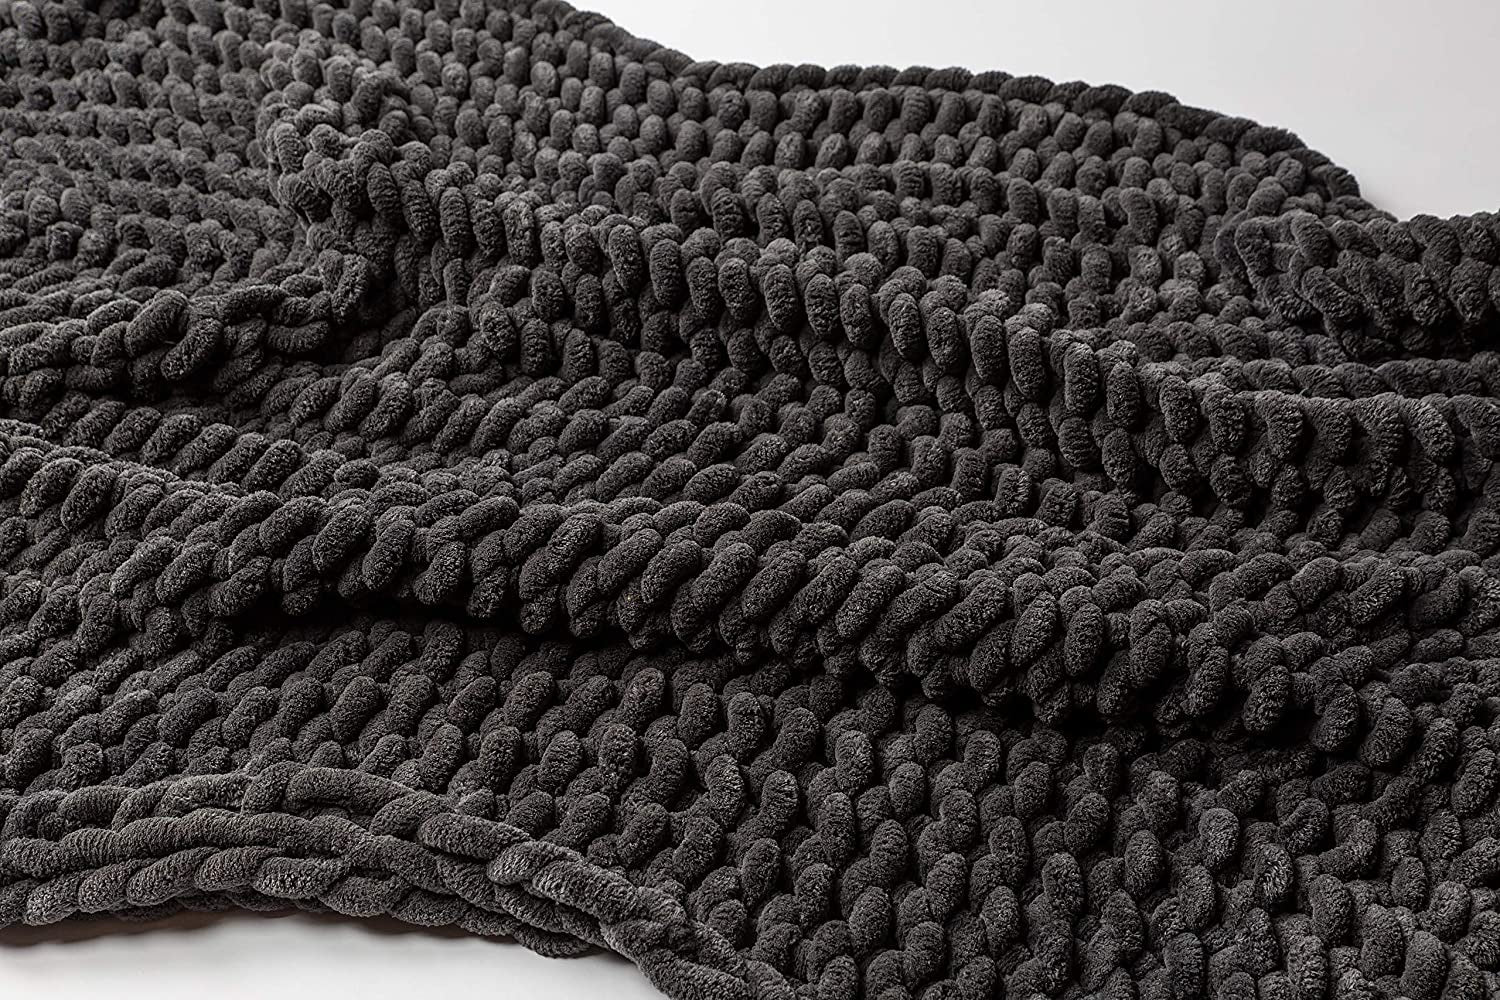 "Premium  Grey Chunky Knit Boho Throw Blanket - Oversized Cable Knit Blanket for Bed or Couch"